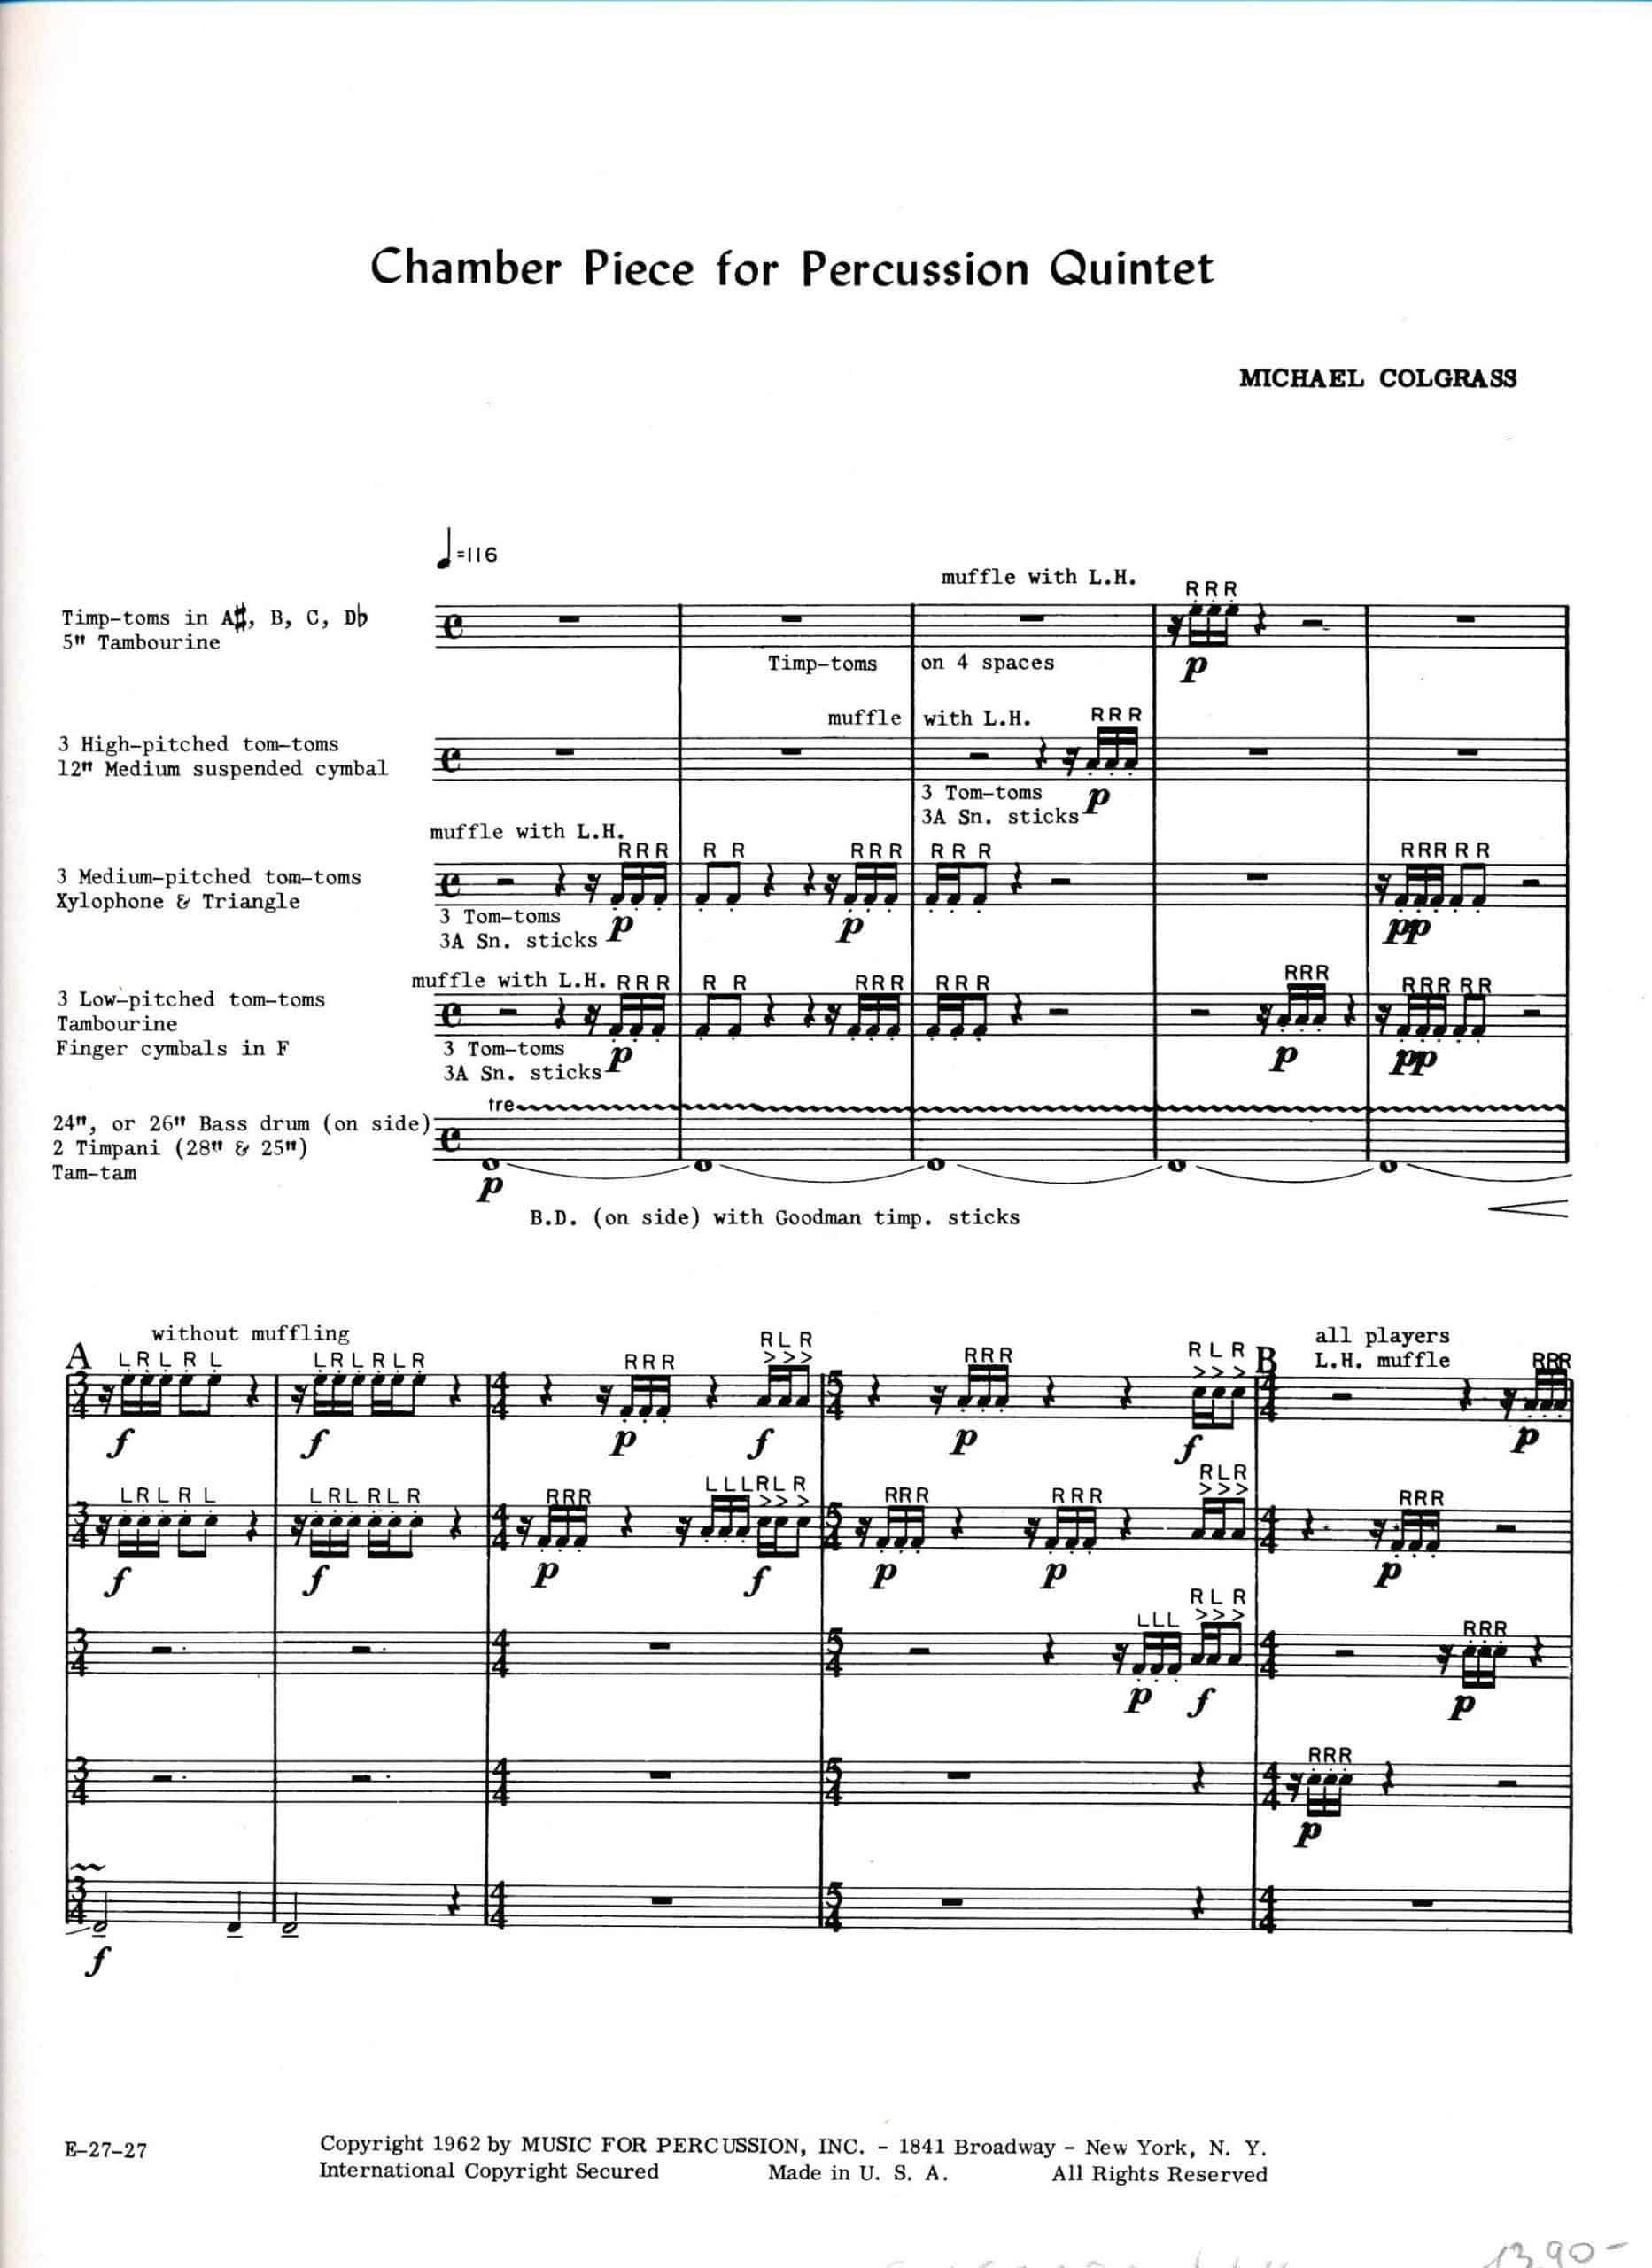 Chamber Piece For Percussion Quintet by Michael Colgrass